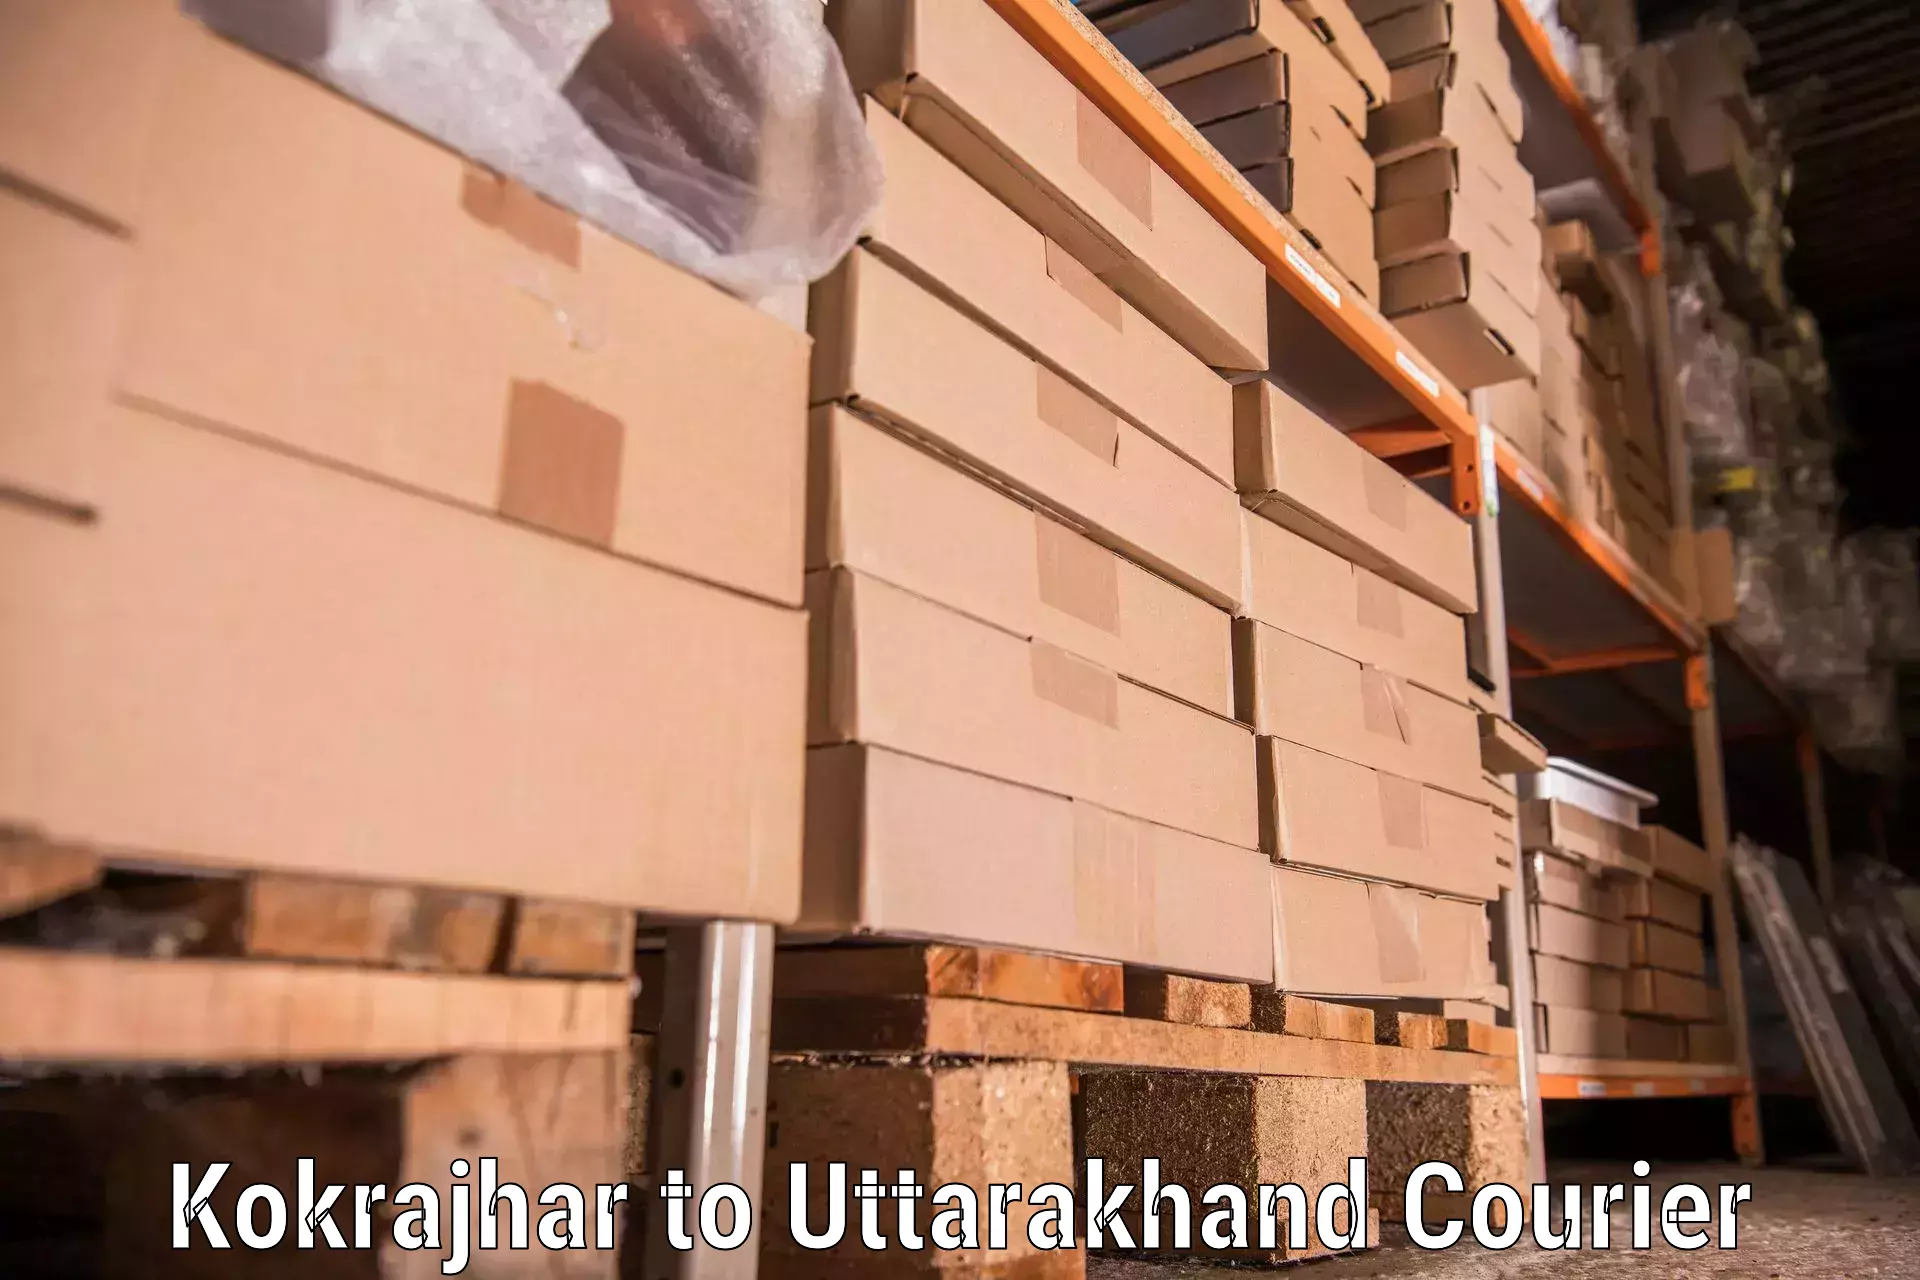 Home relocation experts Kokrajhar to Roorkee